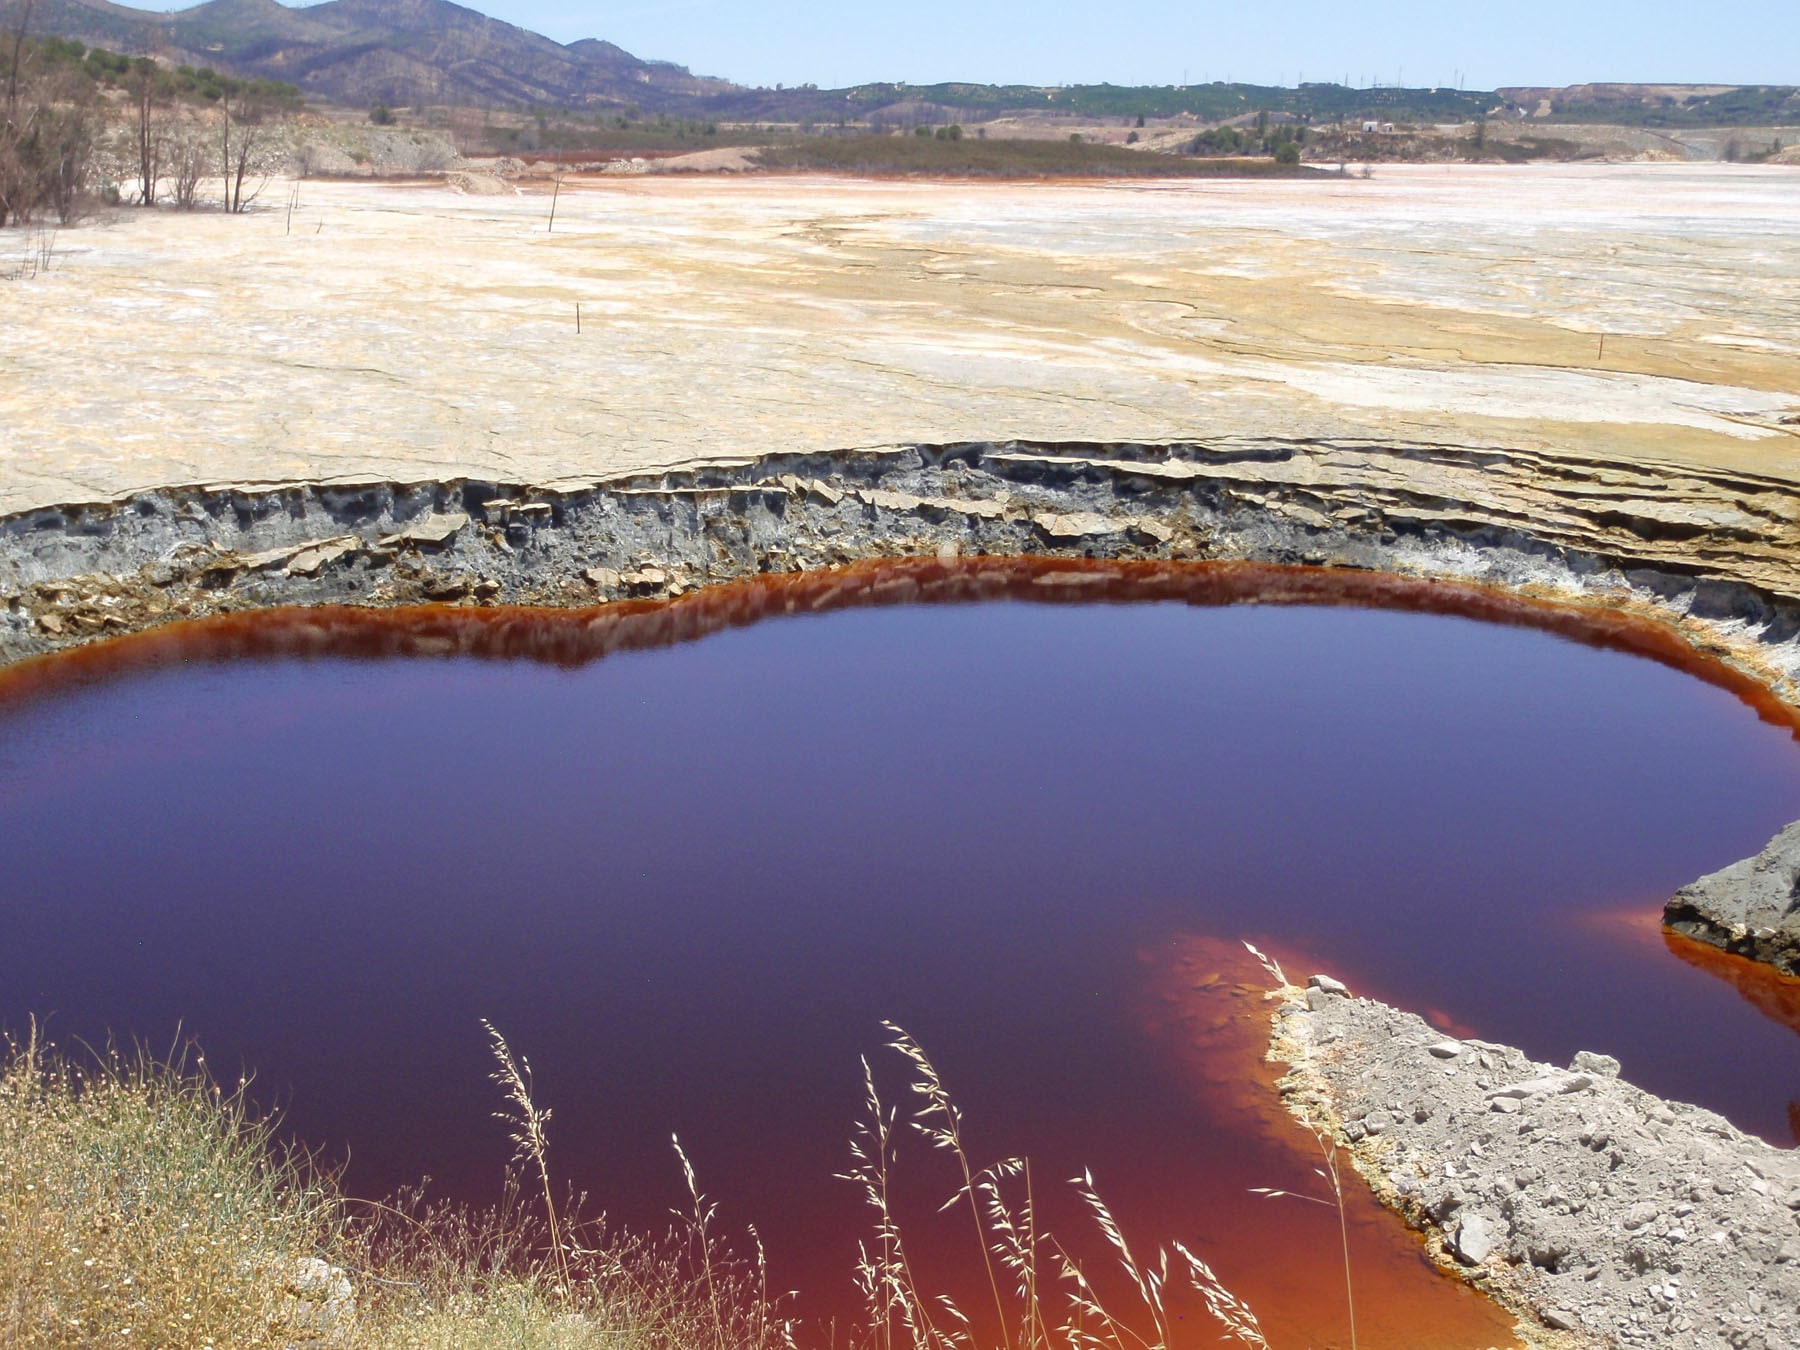 Evidence of saturation in the main tailings dams